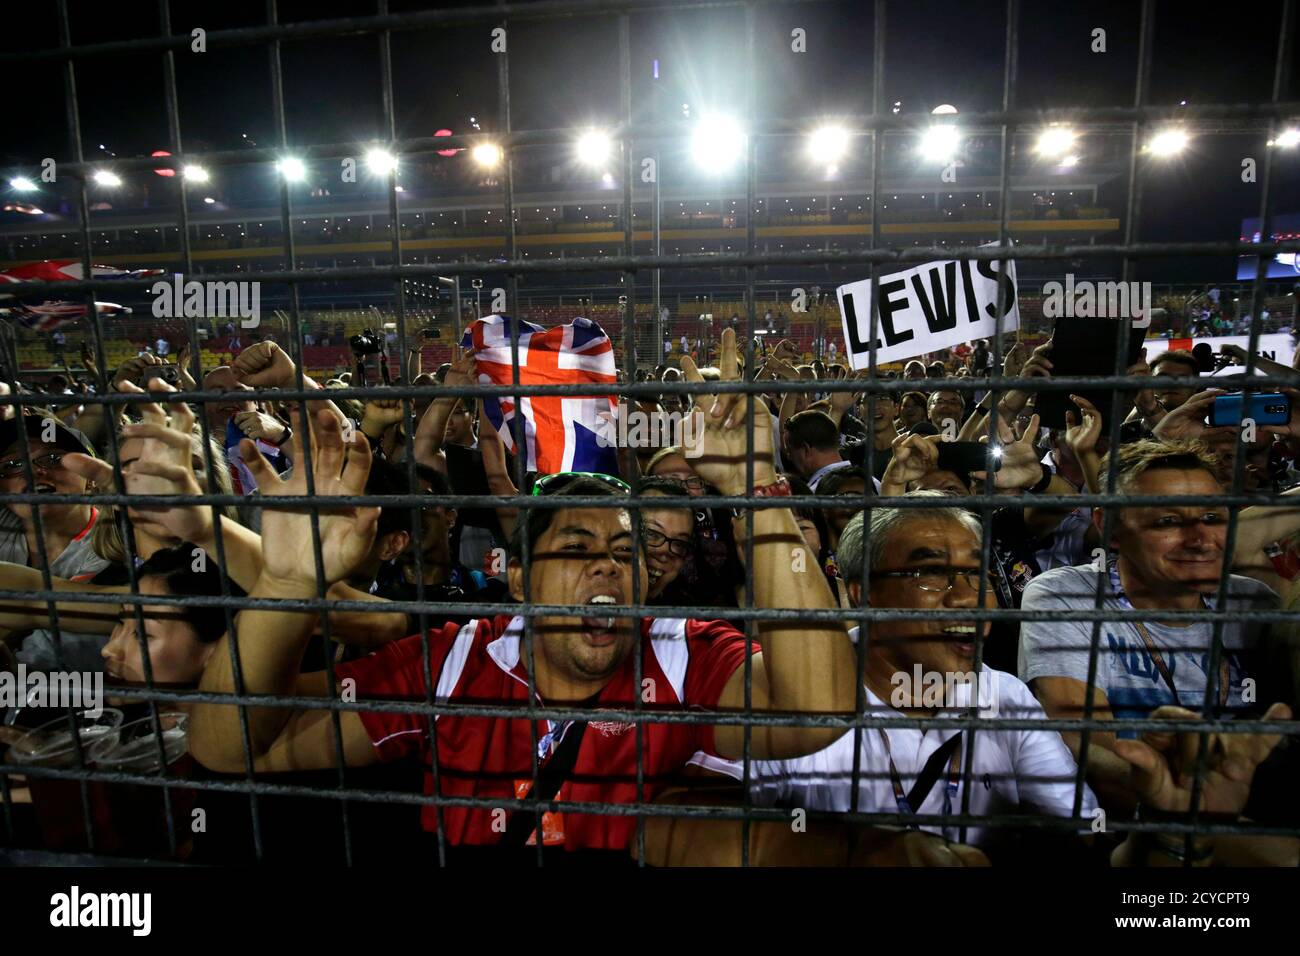 Fans cheer during the podium ceremony of the Singapore F1 Grand Prix at the Marina Bay street circuit in Singapore September 21, 2014. Lewis Hamilton stormed to an emphatic victory at the Singapore Grand Prix on Sunday to wrest the championship lead from Mercedes team mate Nico Rosberg after the German retired with steering wheel problems. REUTERS/Xavier Galiana (SINGAPORE - Tags: SPORT MOTORSPORT F1) Foto de stock